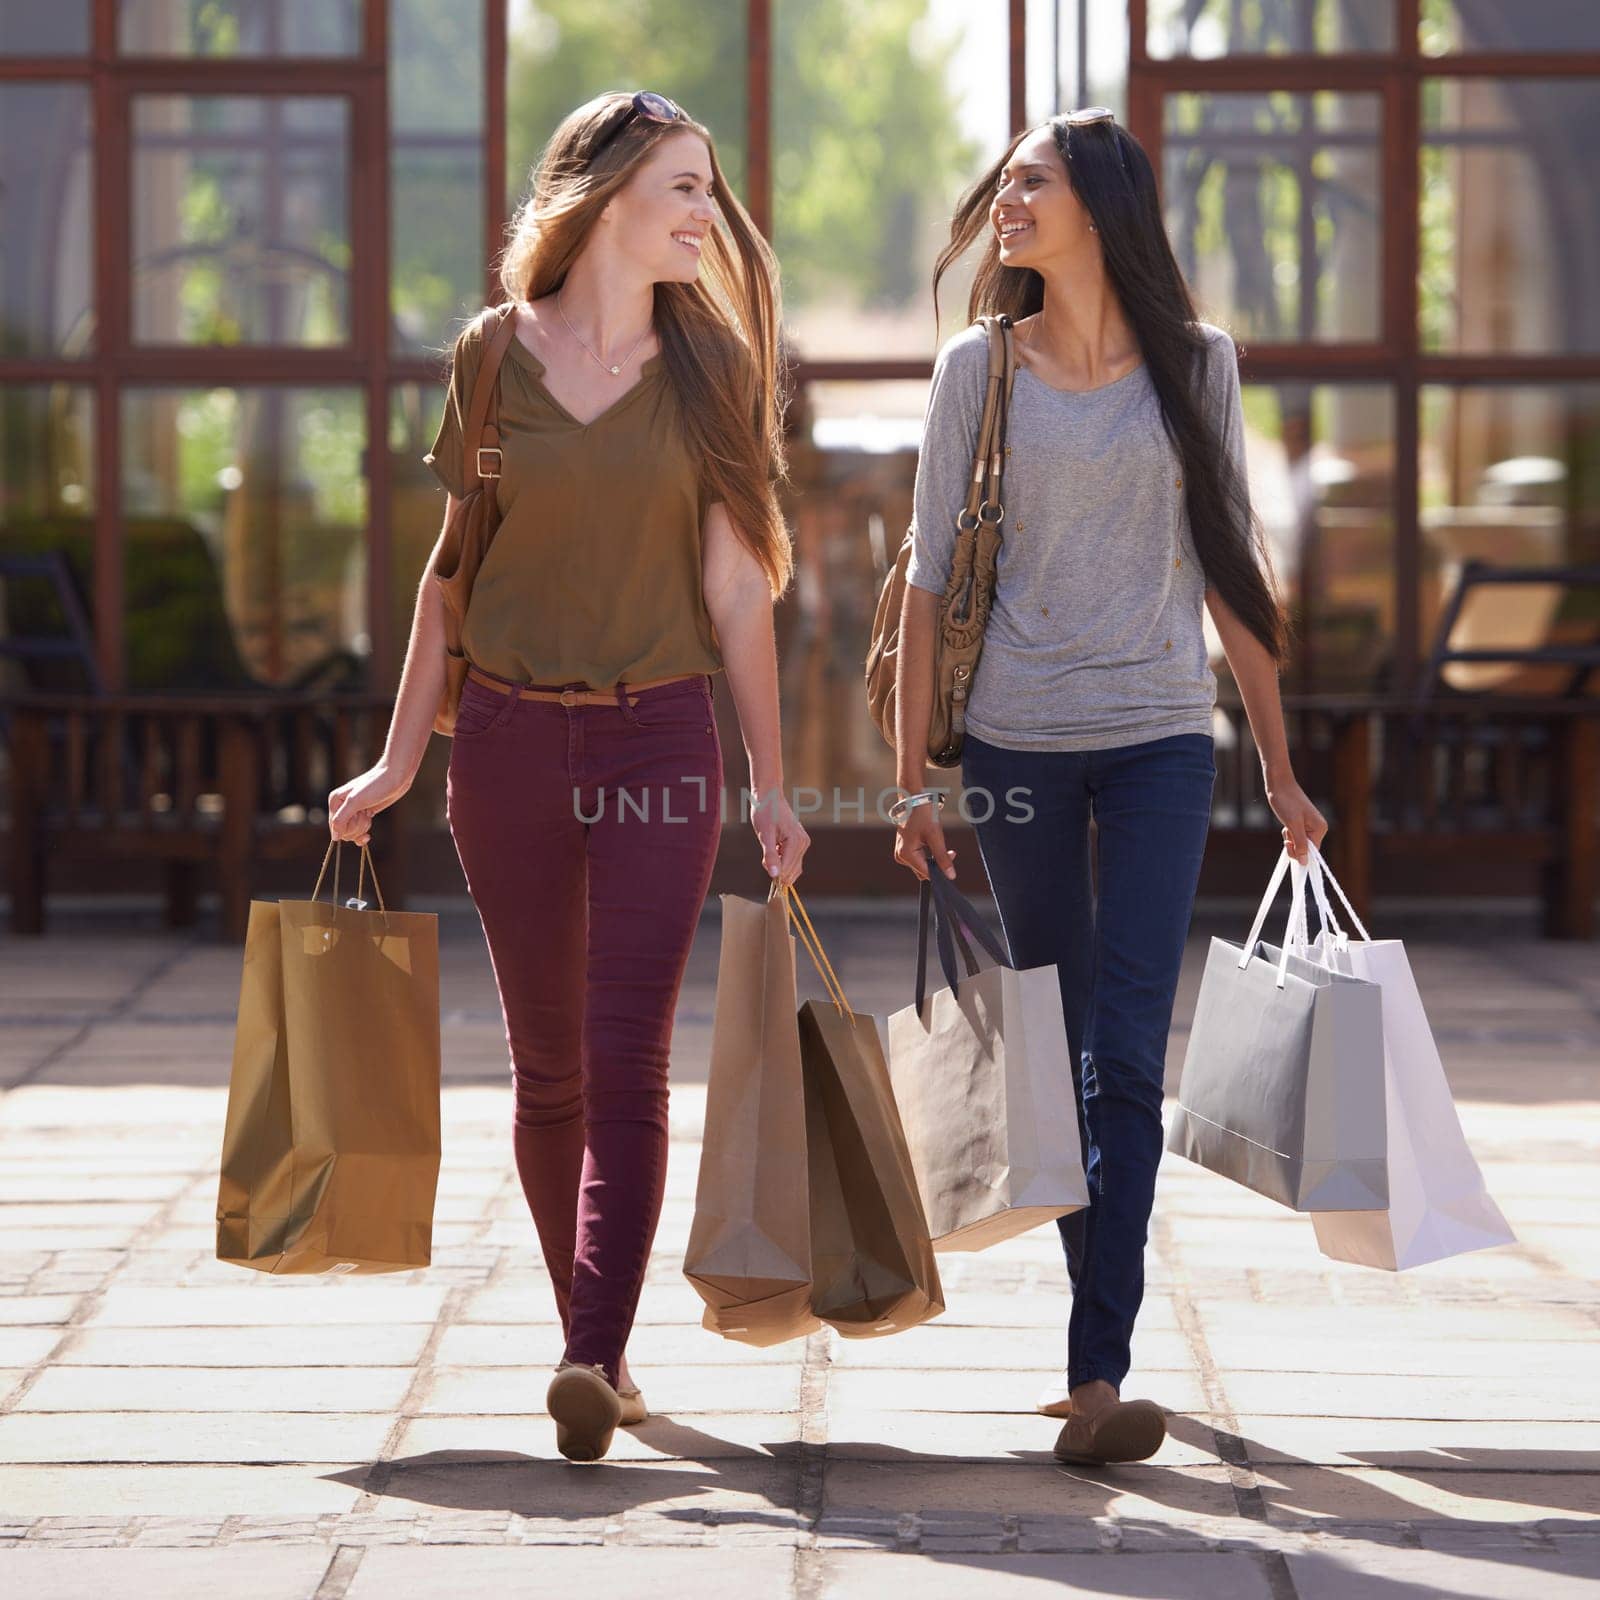 Women, friends and walking with shopping bag or talking of fashion, sale and discount outdoor by store, mall or city. Young and happy people with style, clothes and luxury for commerce or retail.